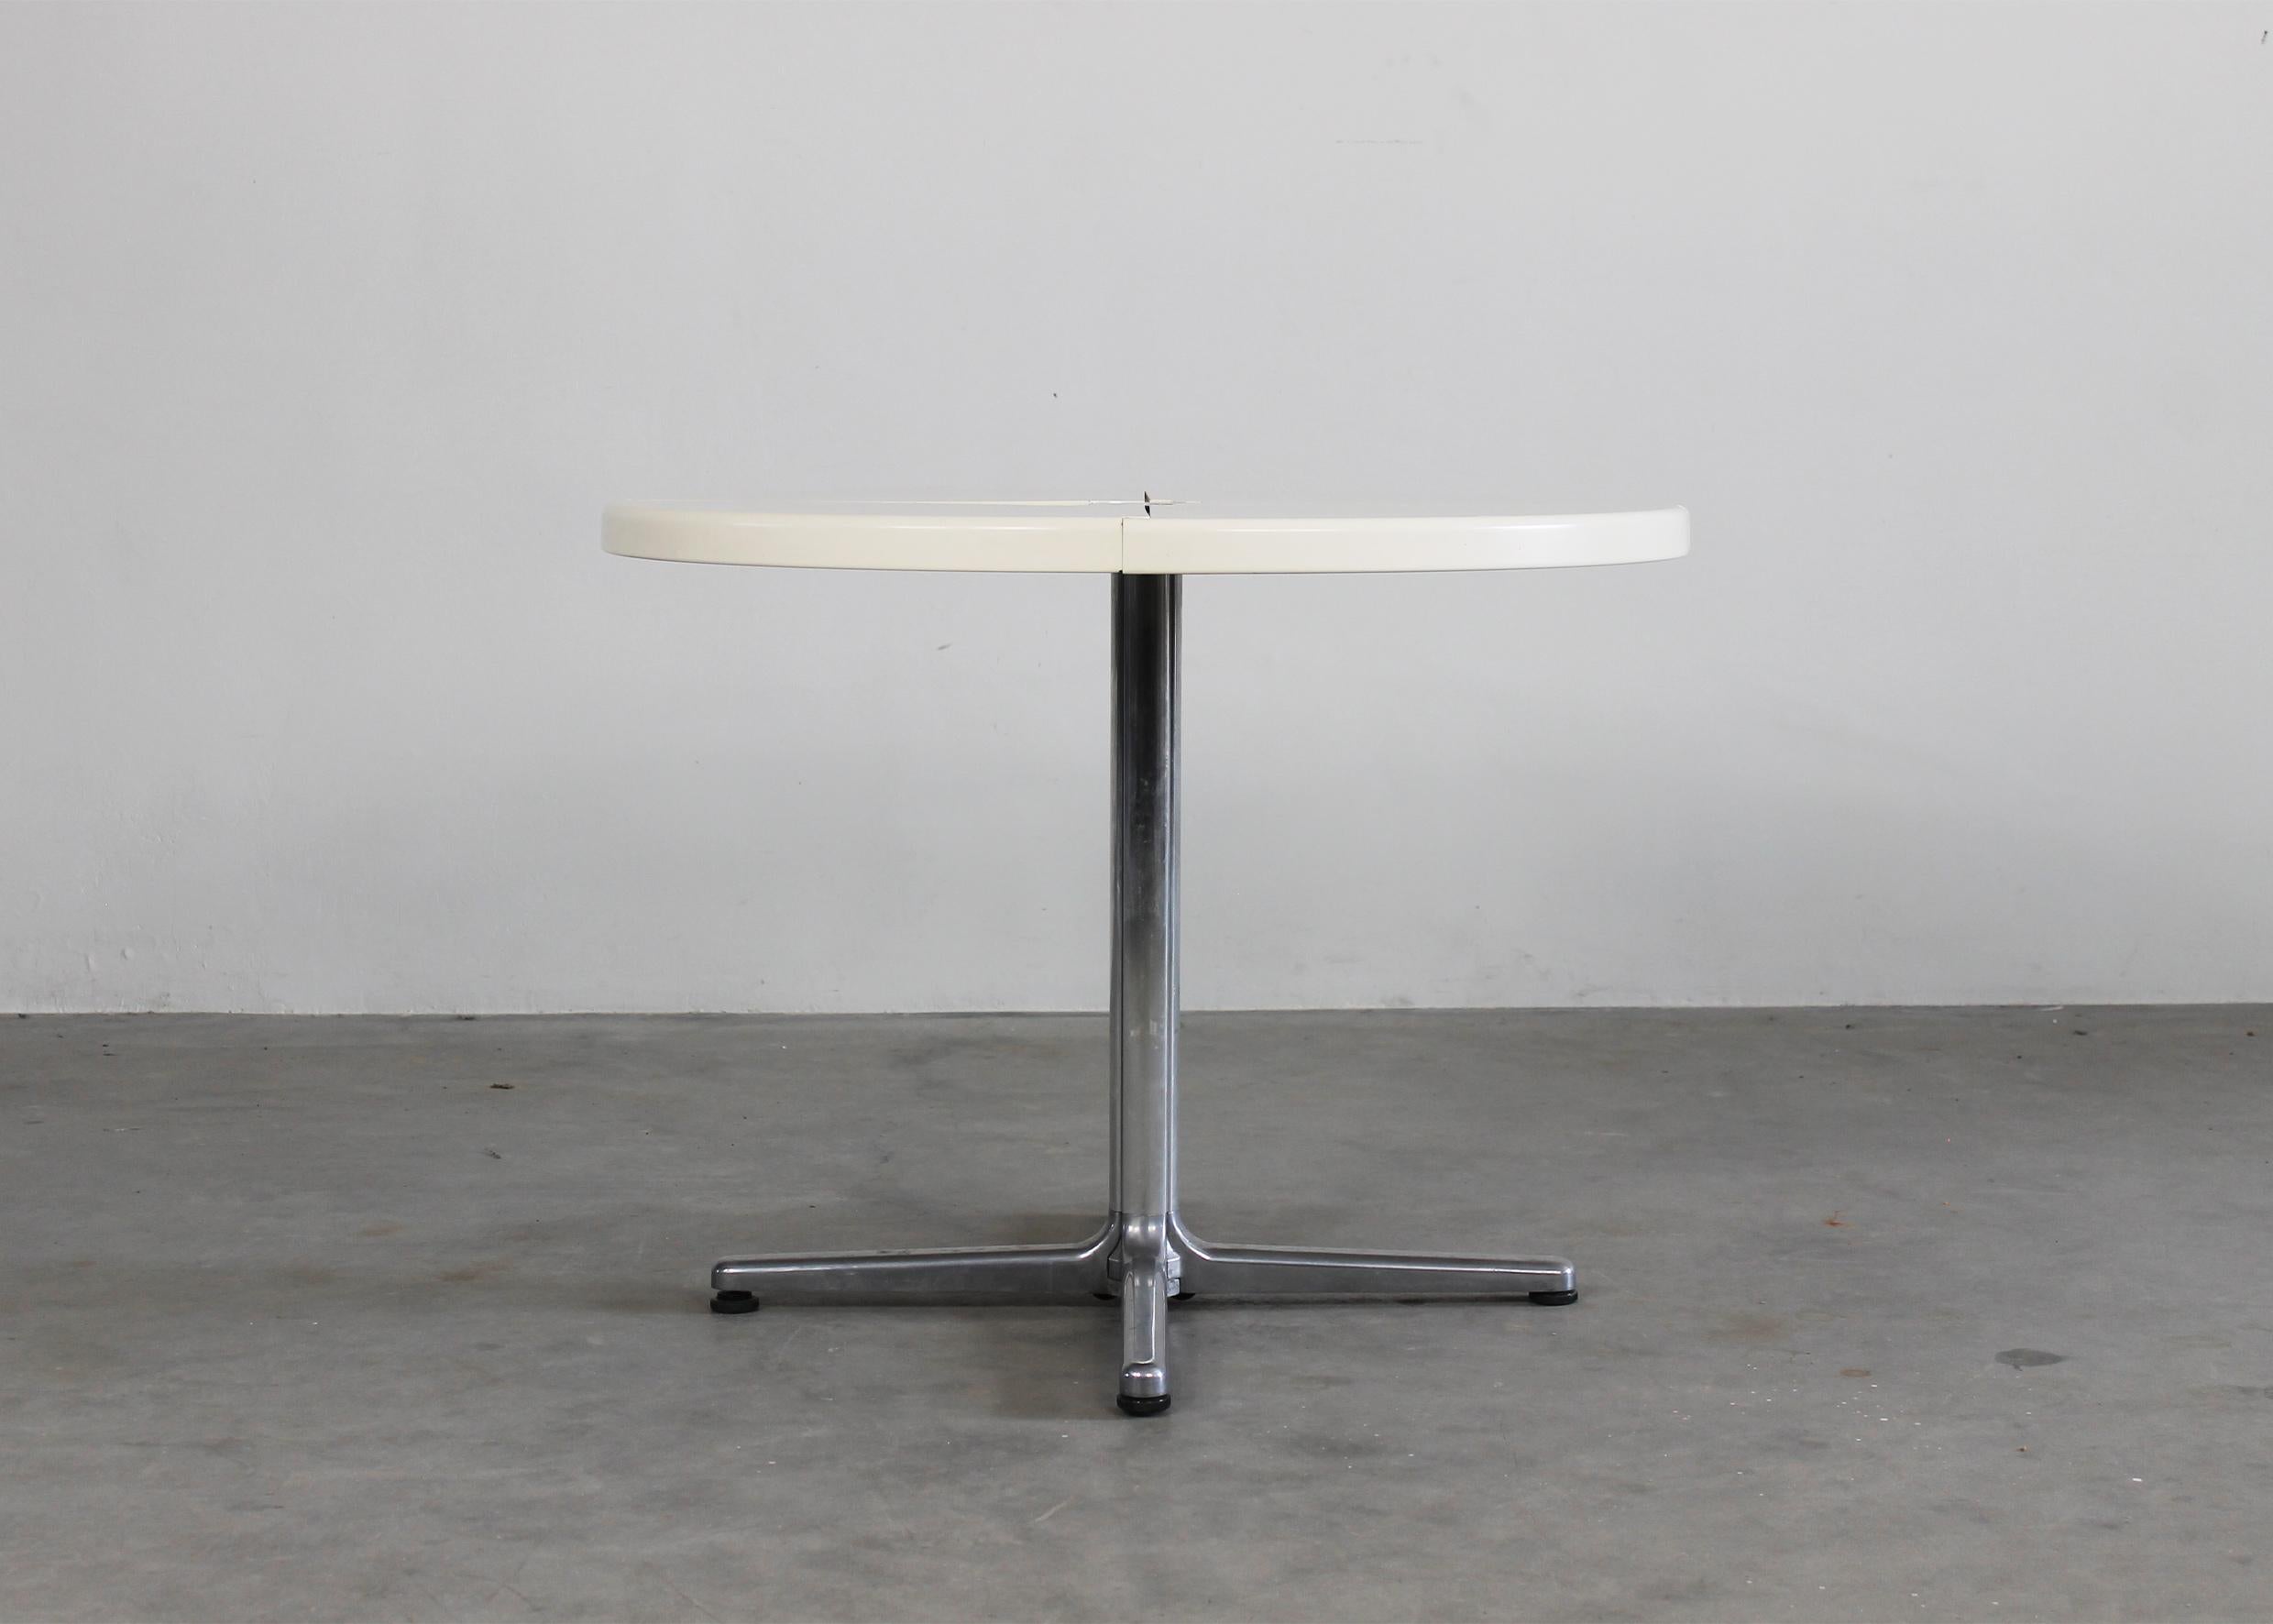 Round Plano folding table with die-cast aluminum base with wheels and table top in white polyurethane.
Designed by Giancarlo Piretti and produced by Anonima Castelli in the 1970s.

(With the manufacturer's label) 

Giancarlo Piretti was born in